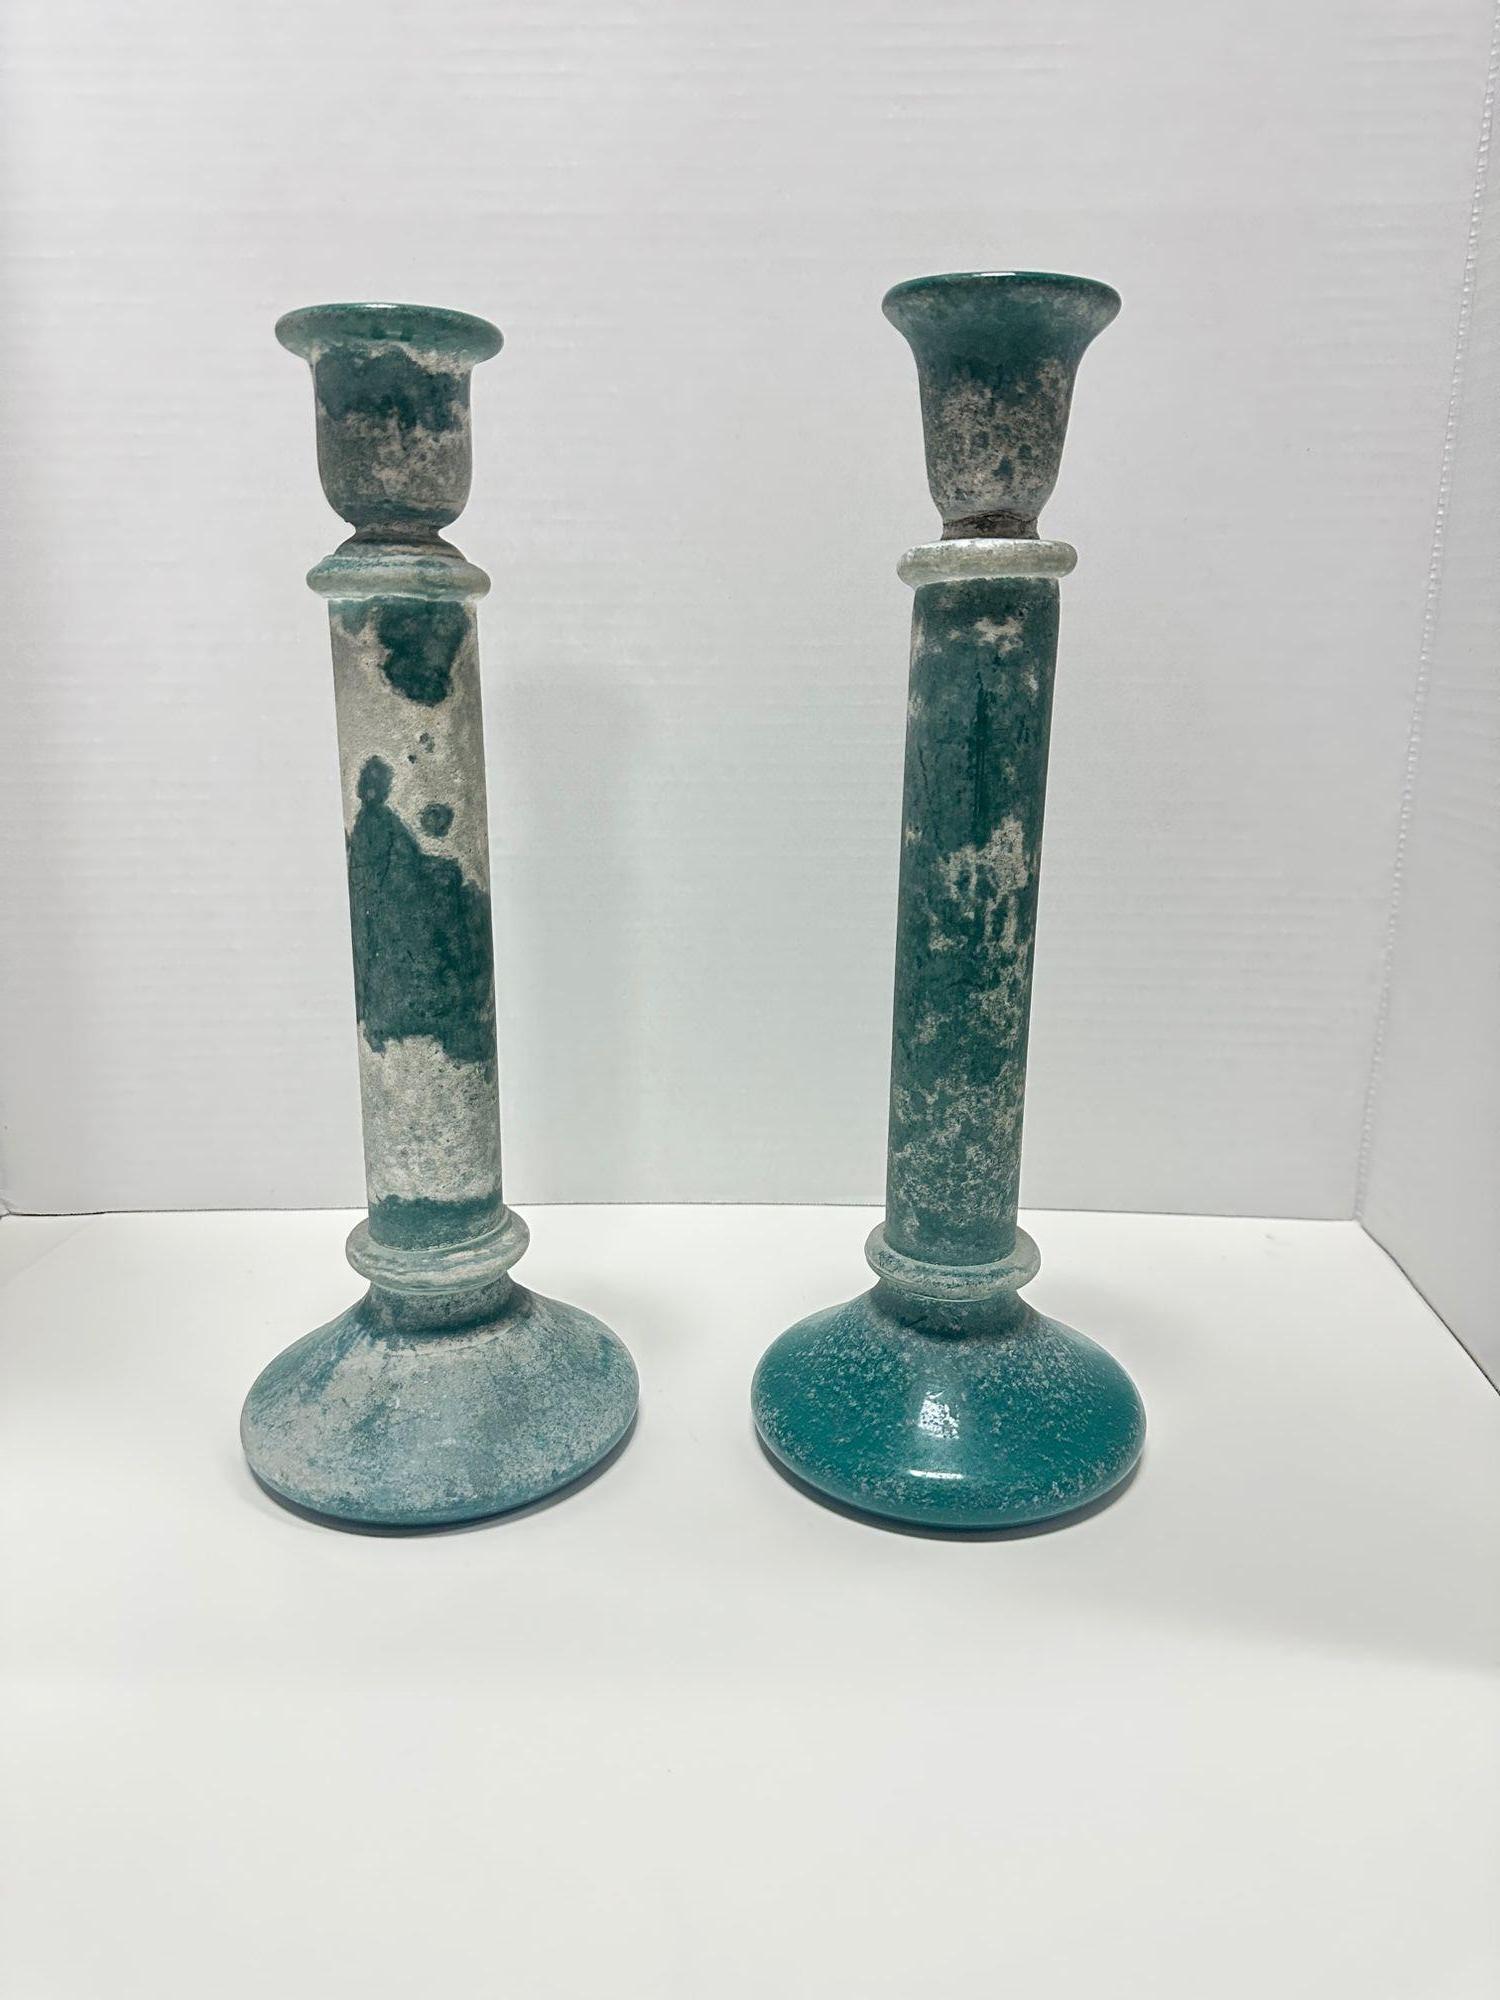 20th Century Vintage Candlestick holders Turquoise Glass Frosted, Pair